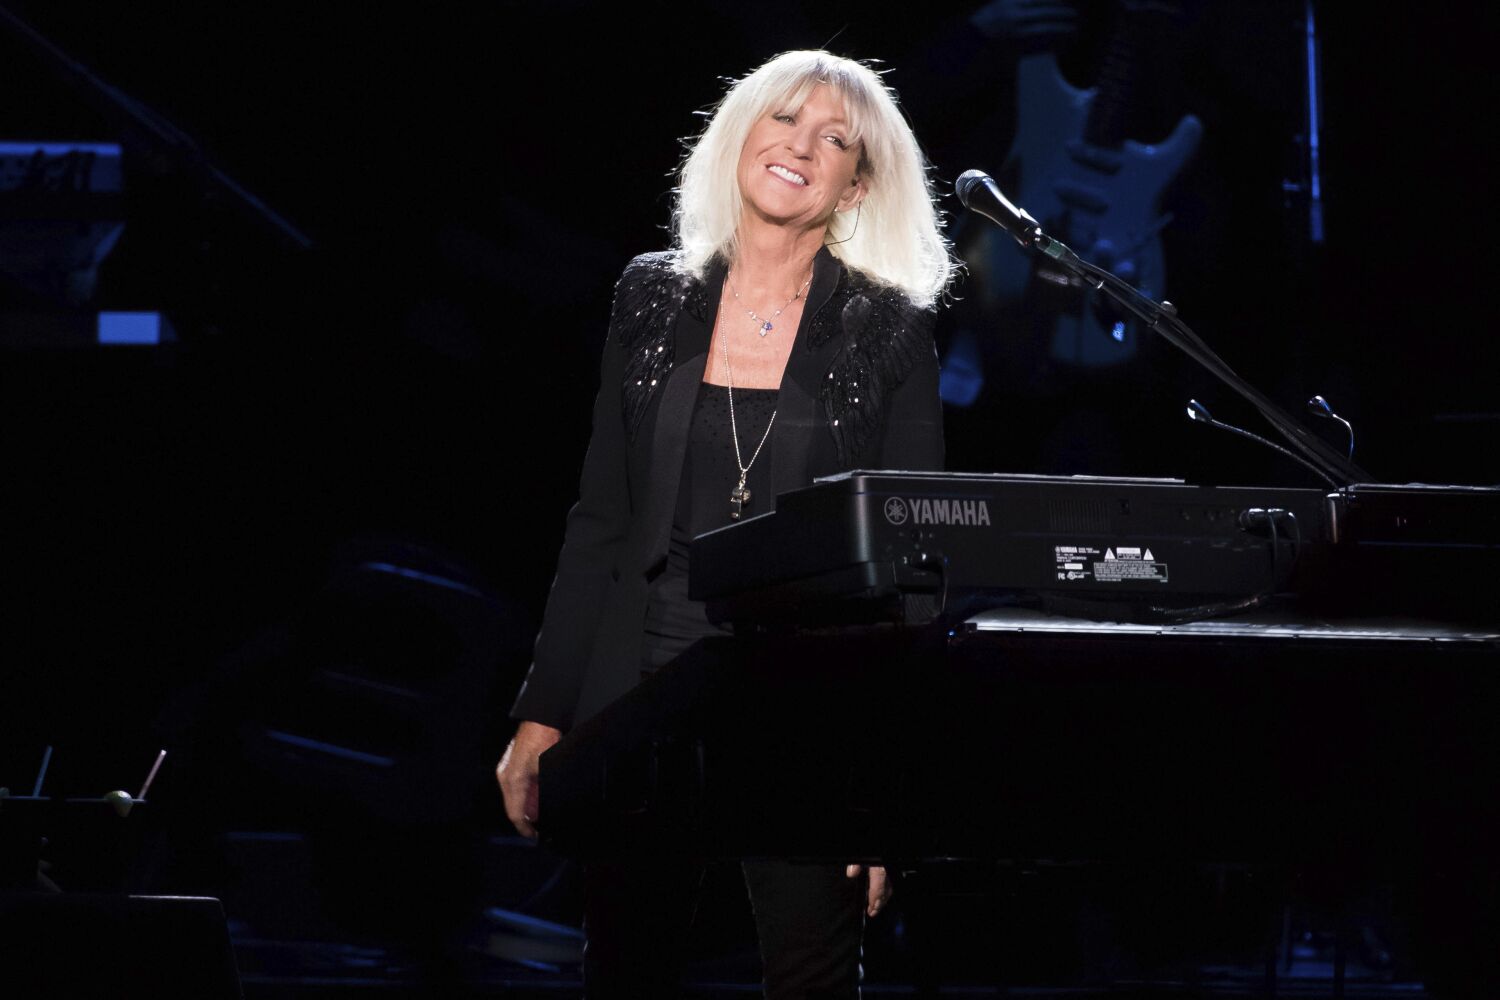 Cause of death revealed for Fleetwood Mac's Christine McVie